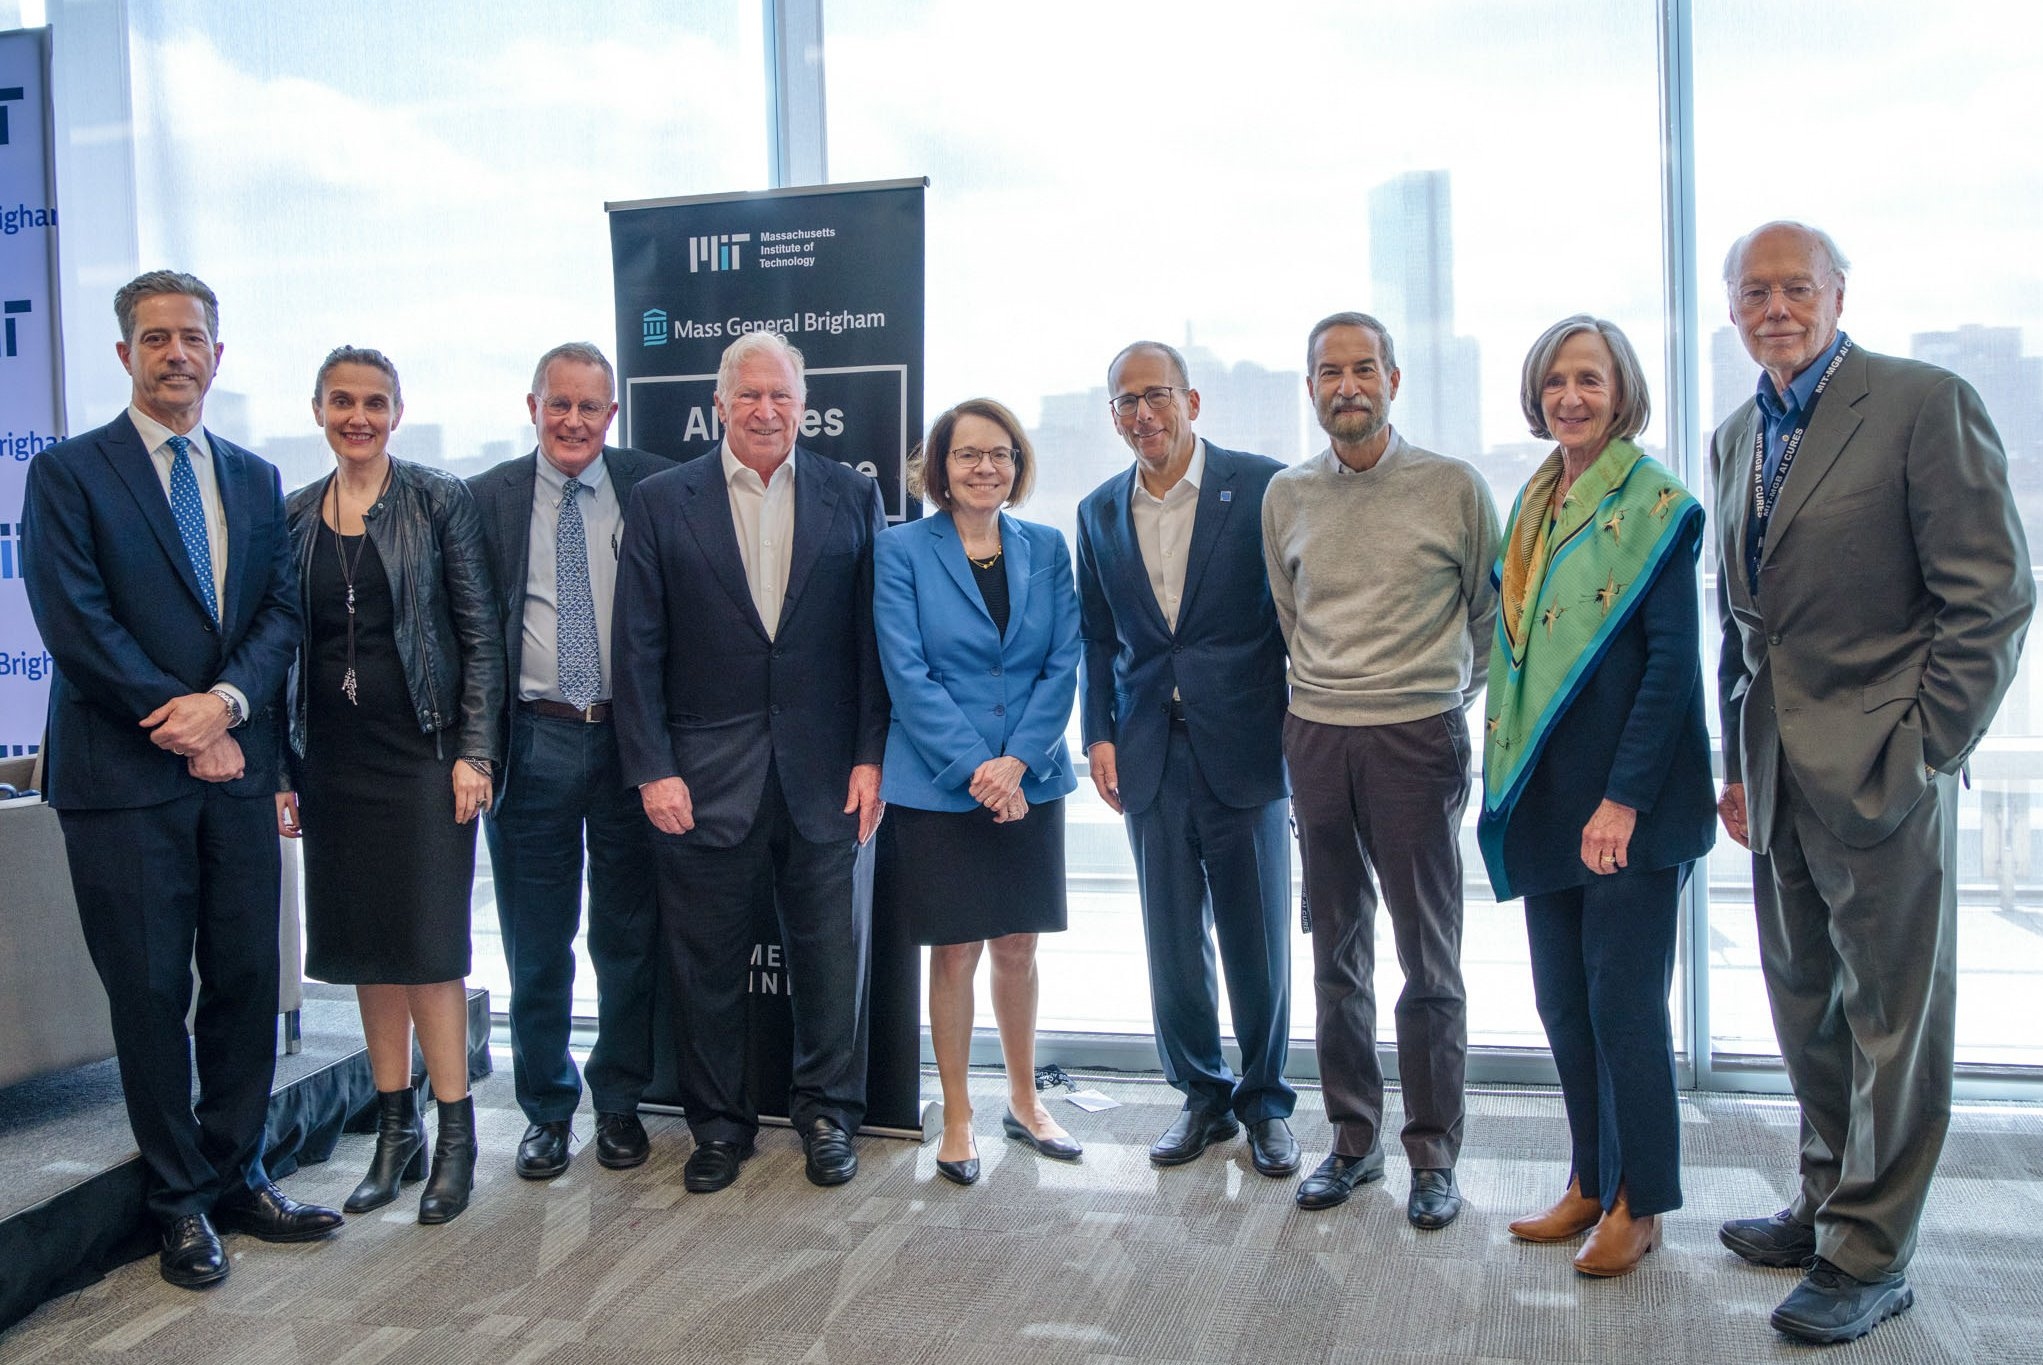 MIT-MGB AI Cures speakers and senior advisory committee members stand side-by-side. Left to right: Paul Anderson, Regina Barzilay, David Bates, Terry Ragon, Anne Klibanski, Jonathan Kraft, Mark Schwartz, Susan Hockfield, and Phillip Sharp.